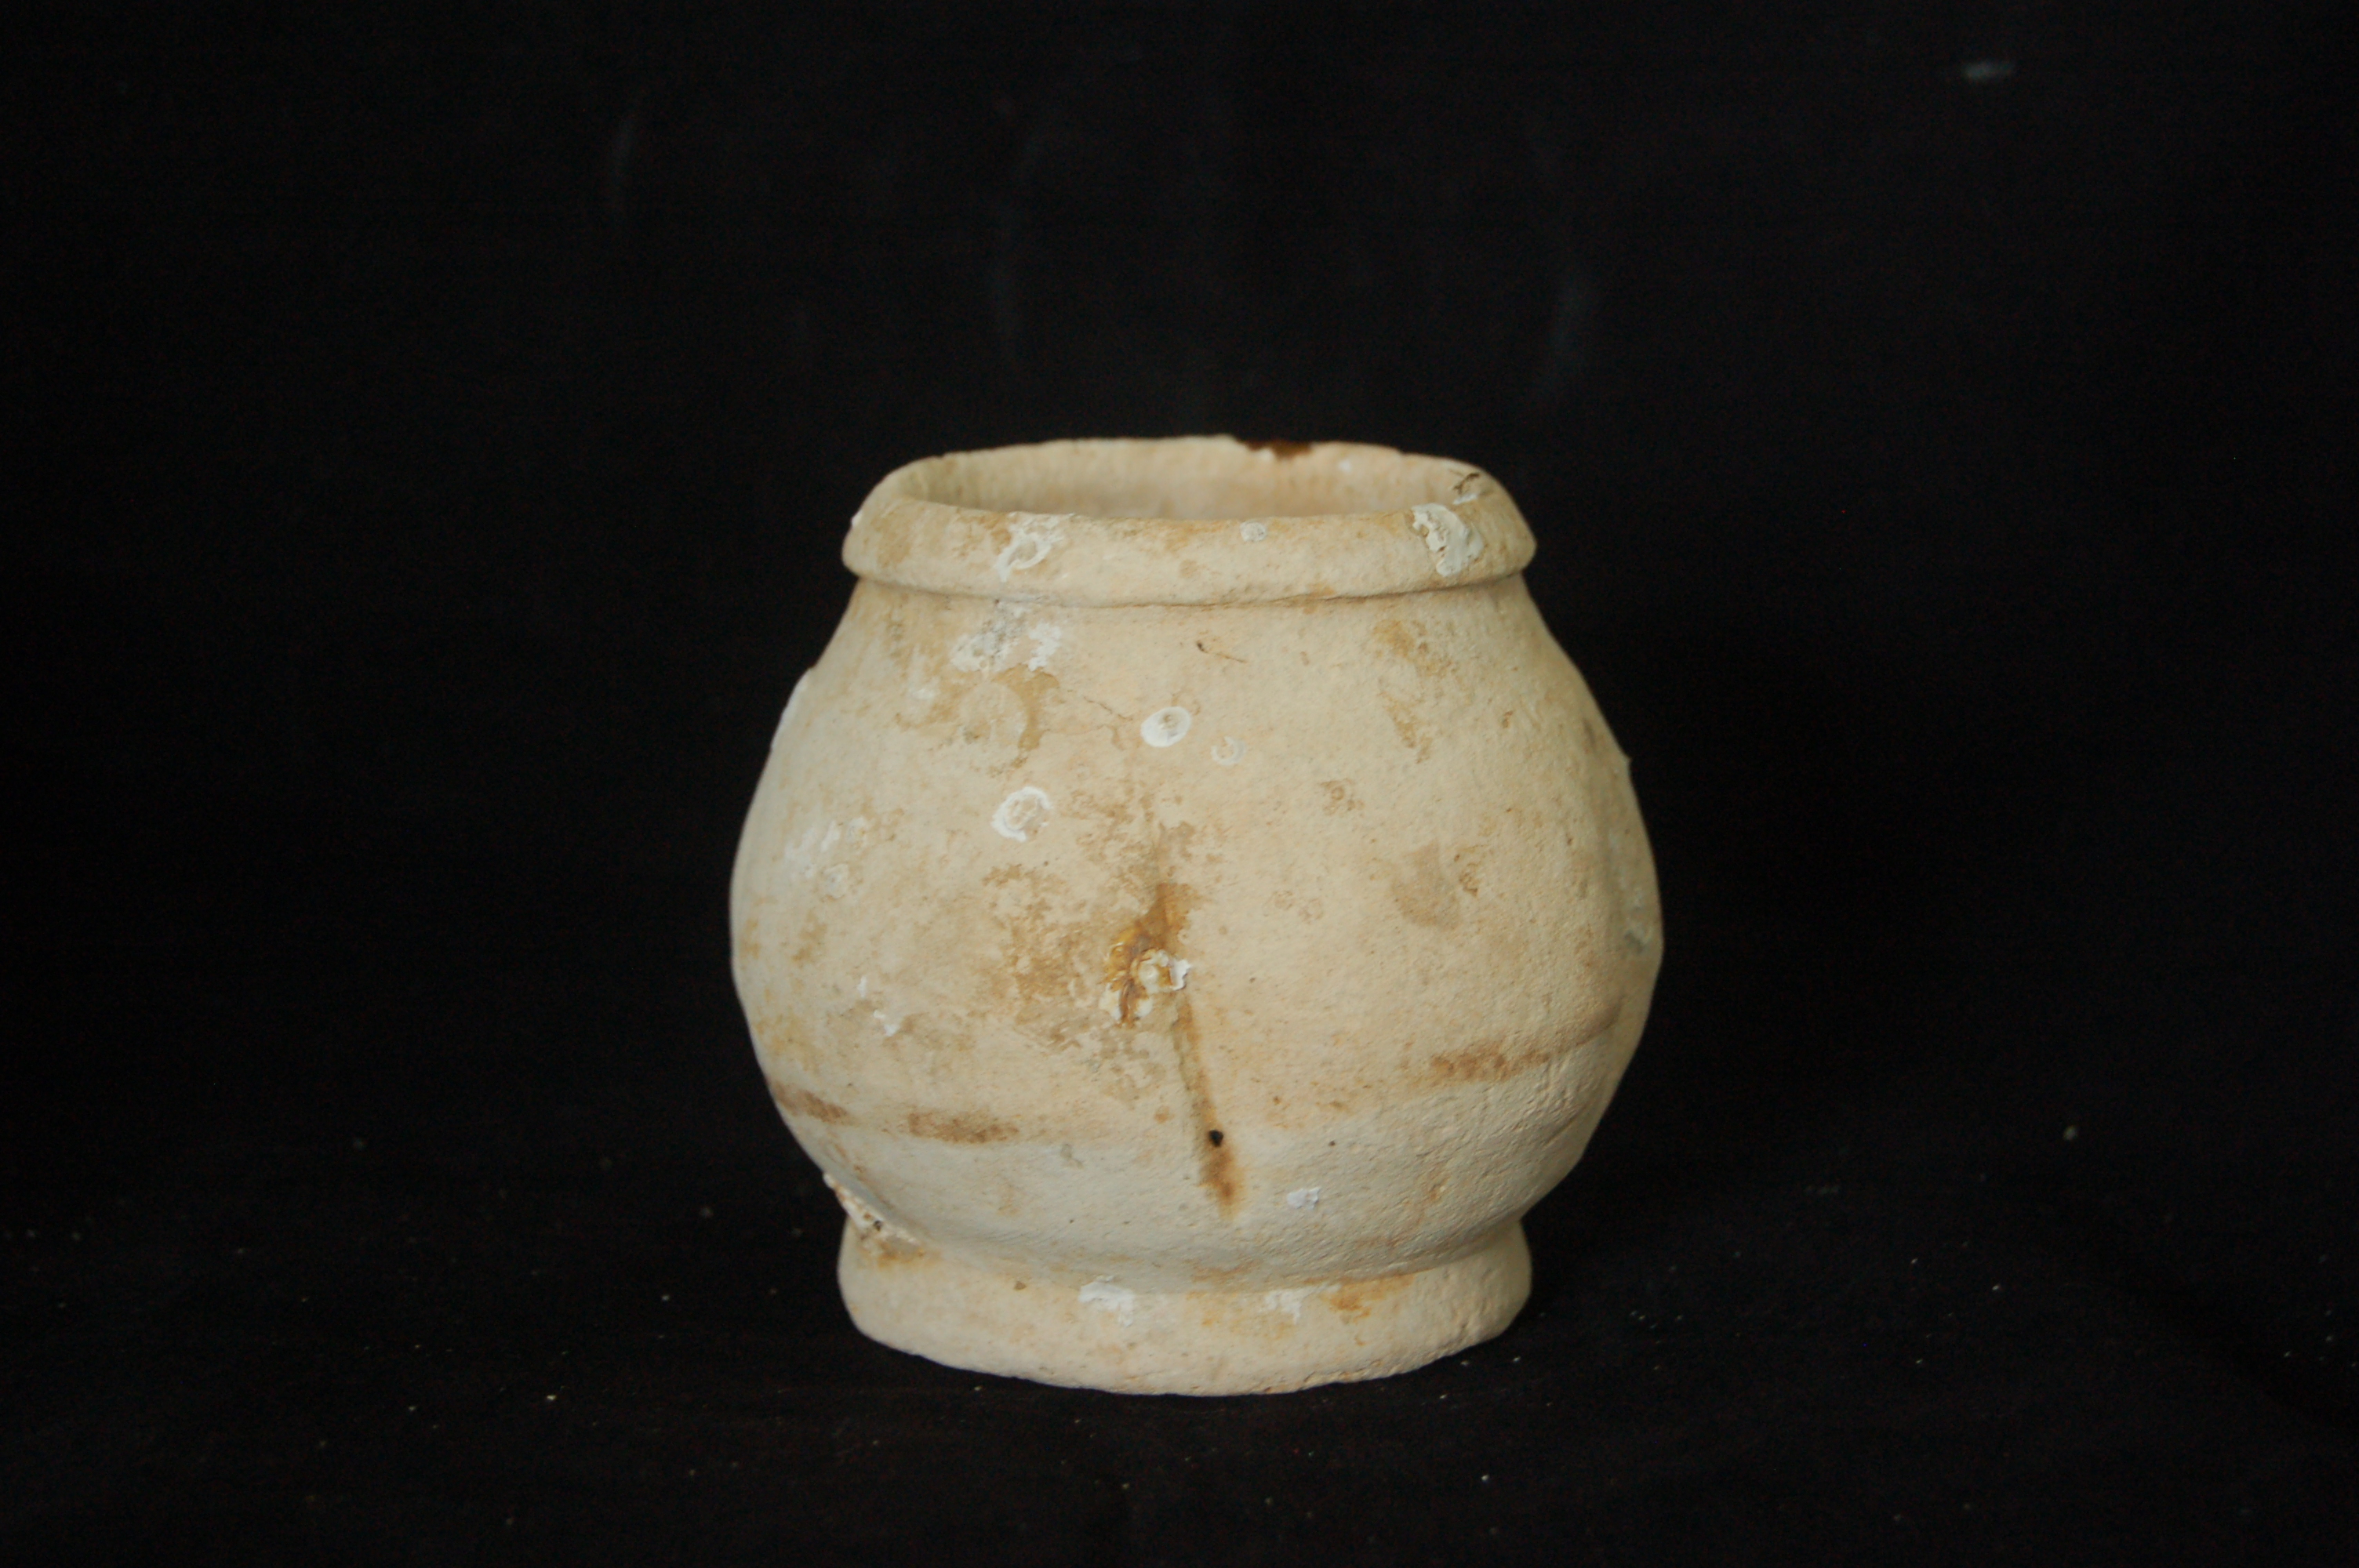 Small squat wide-mouth jar, four lobed, with a folded mouth-rim and a crudely carved foot-ring. Diameter 10 cm, height 9 cm.